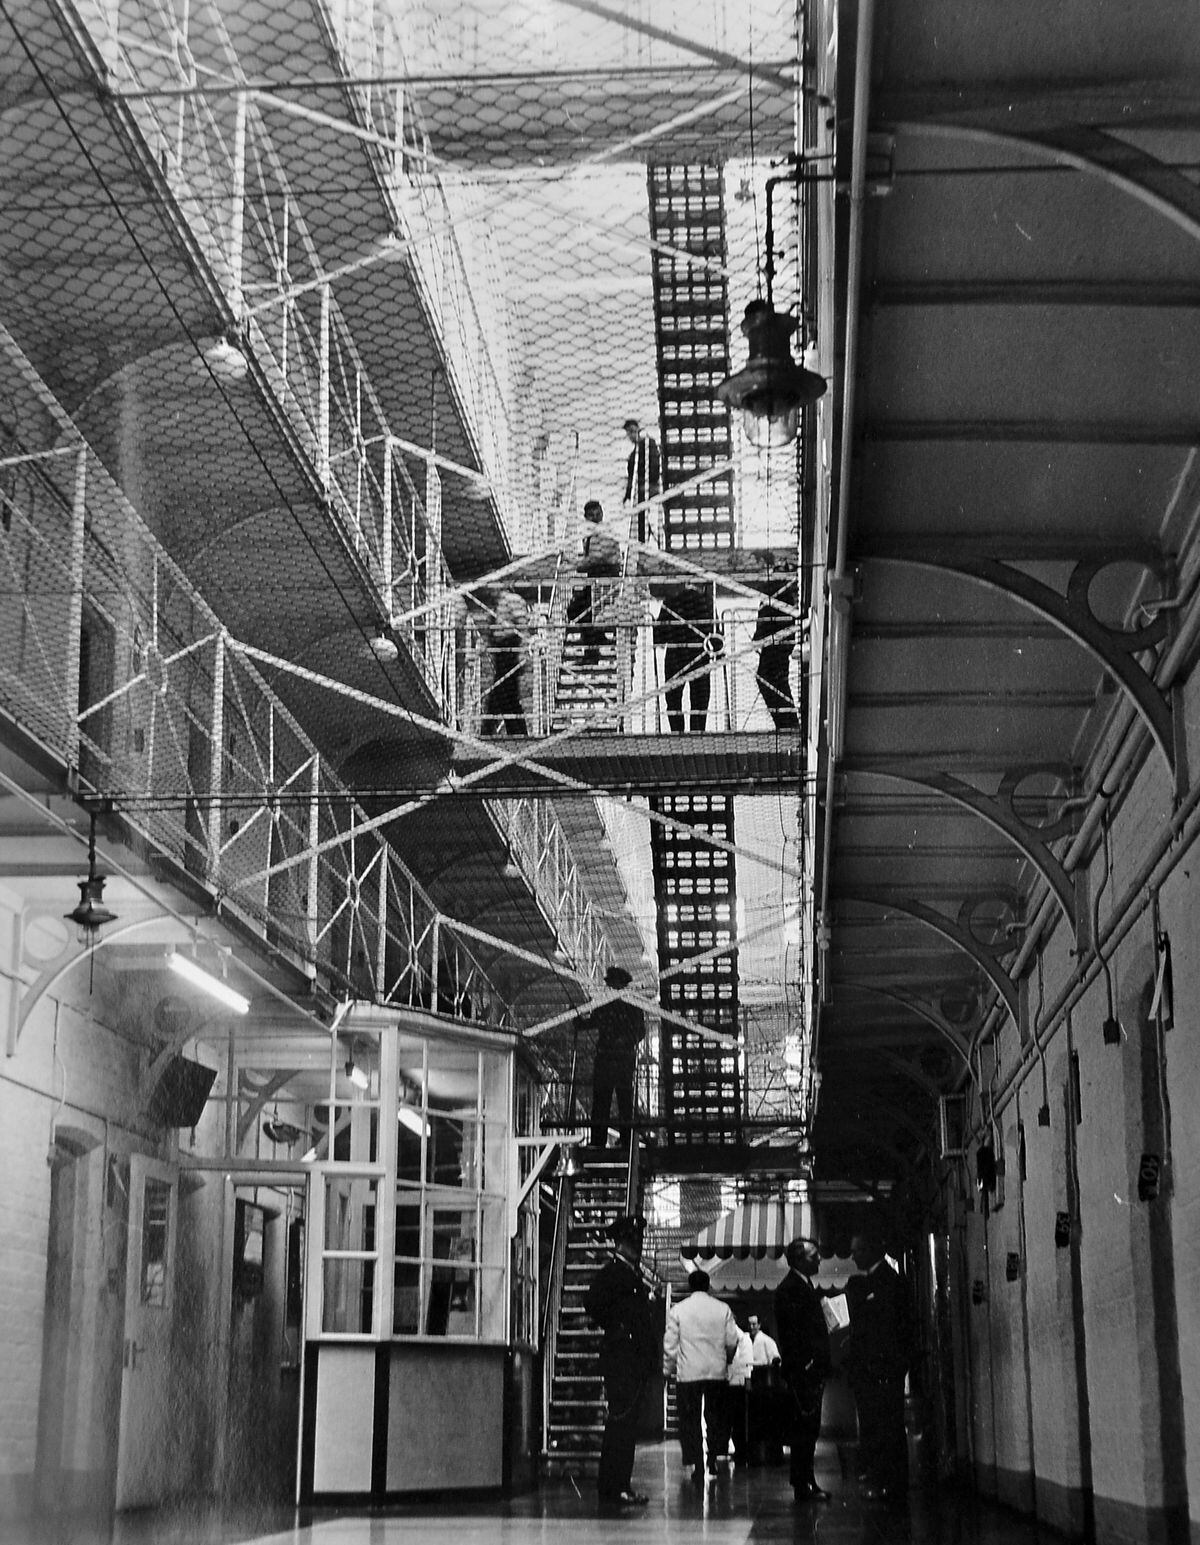 The main cell block at Shrewsbury prison in 1971. 